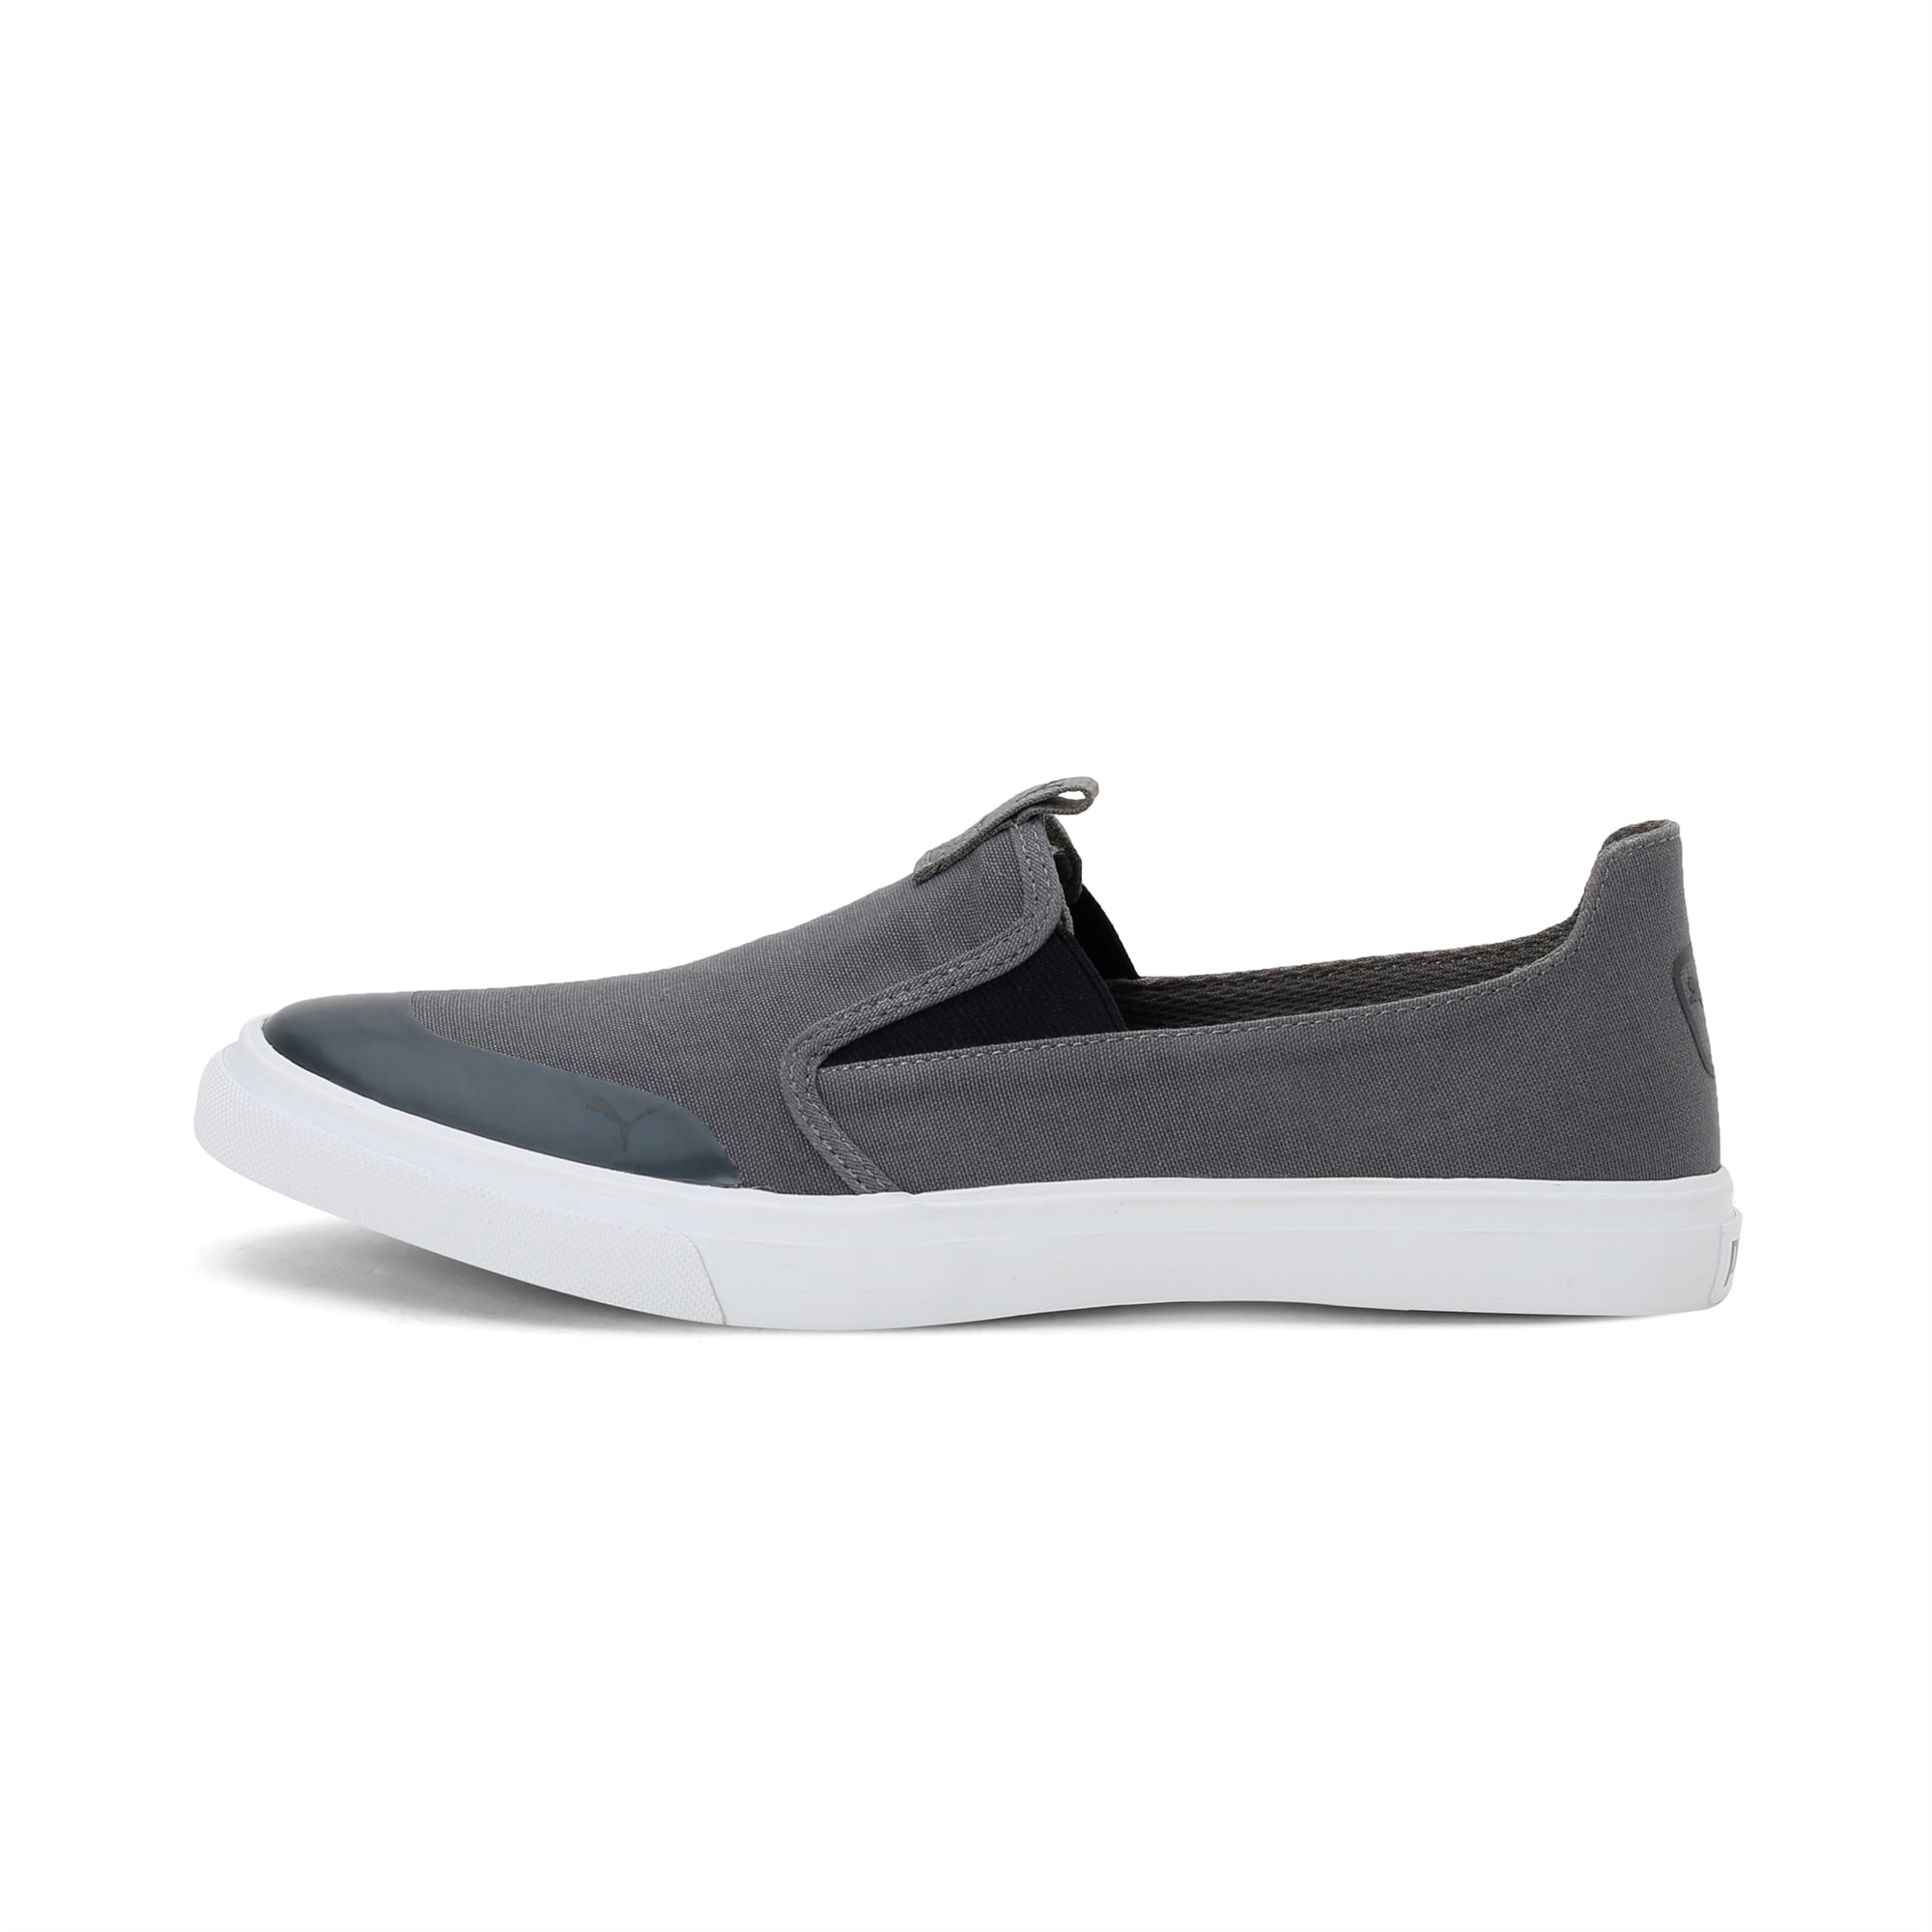 mens knit slip on shoes